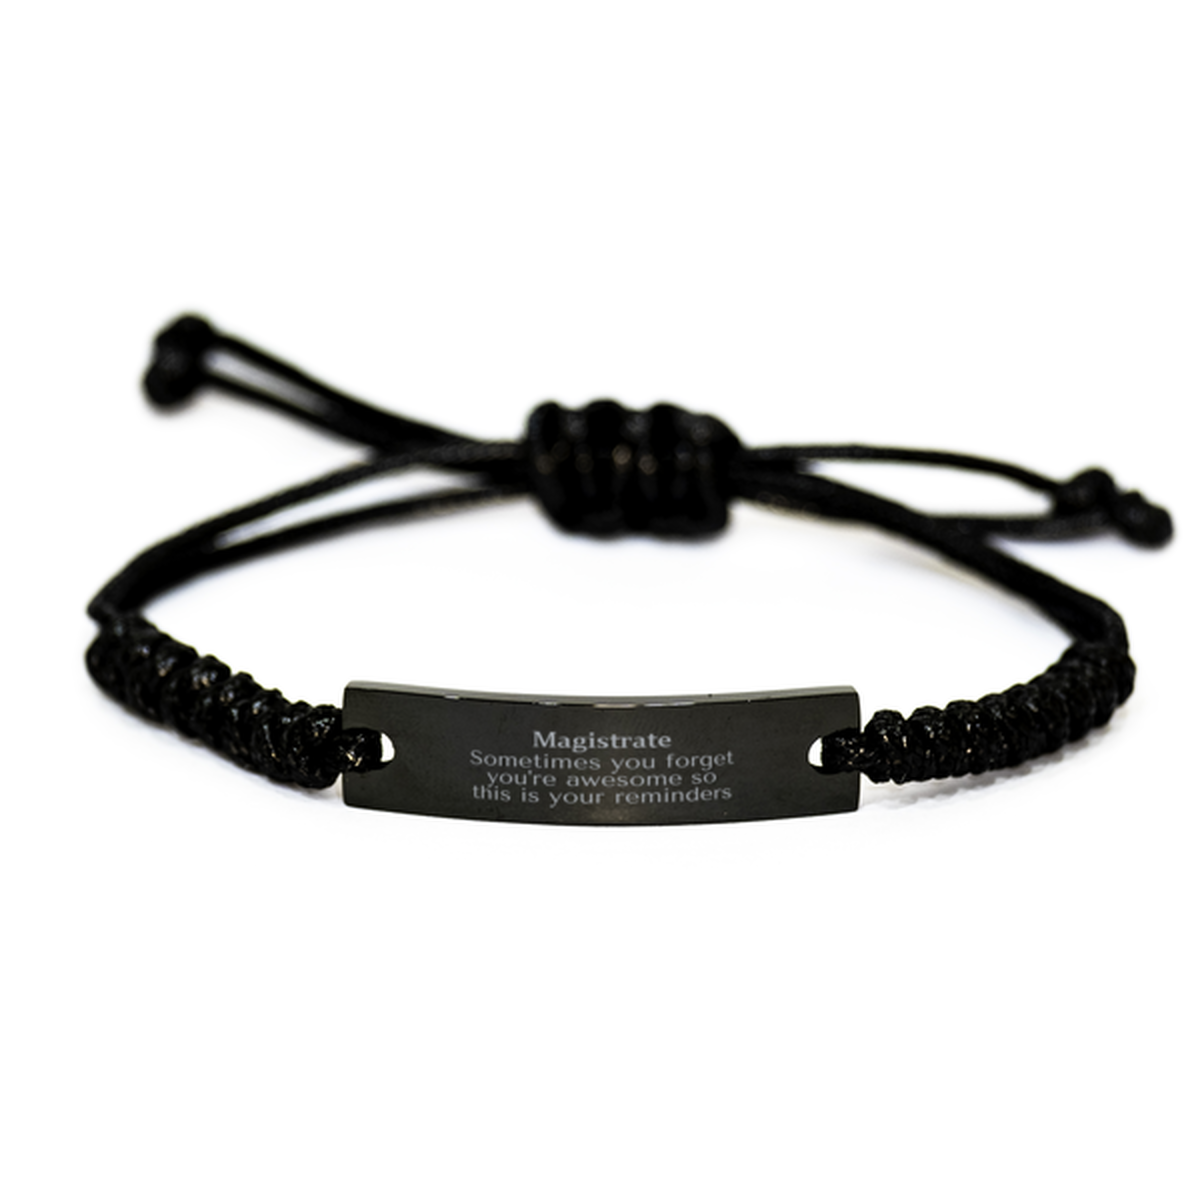 Sentimental Magistrate Black Rope Bracelet, Magistrate Sometimes you forget you're awesome so this is your reminders, Graduation Christmas Birthday Gifts for Magistrate, Men, Women, Coworkers